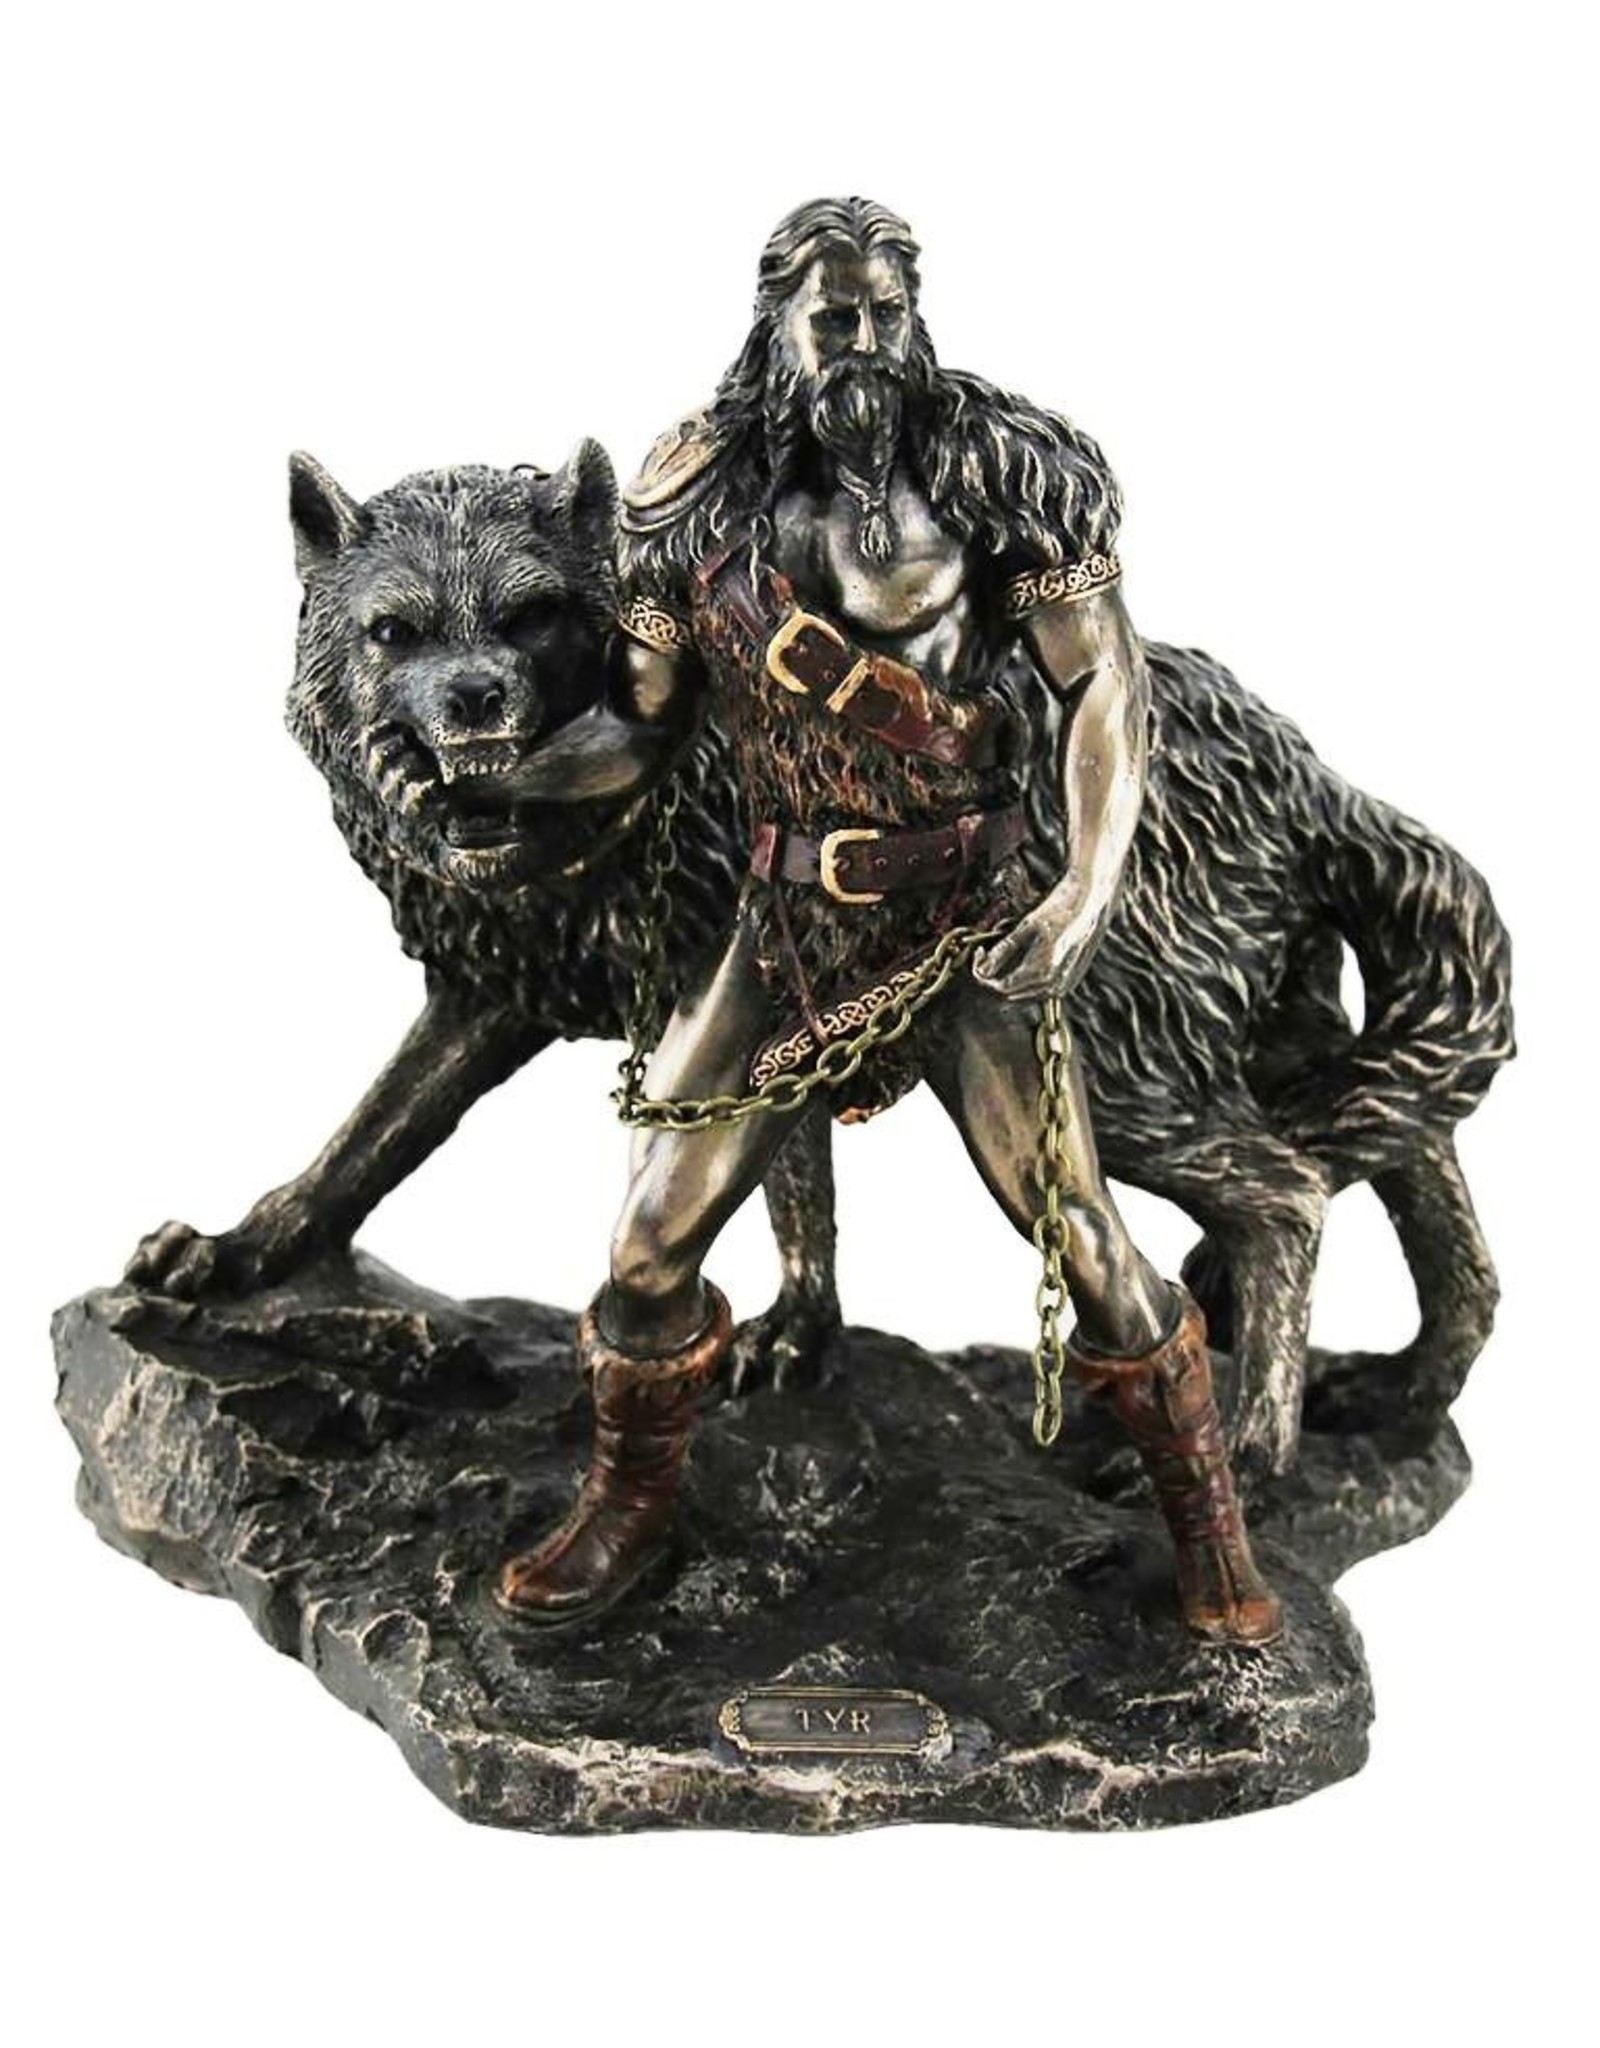 Veronese Design Giftware & Lifestyle - Norse God Tyr and the Binding of Fenrir bronzed figurine